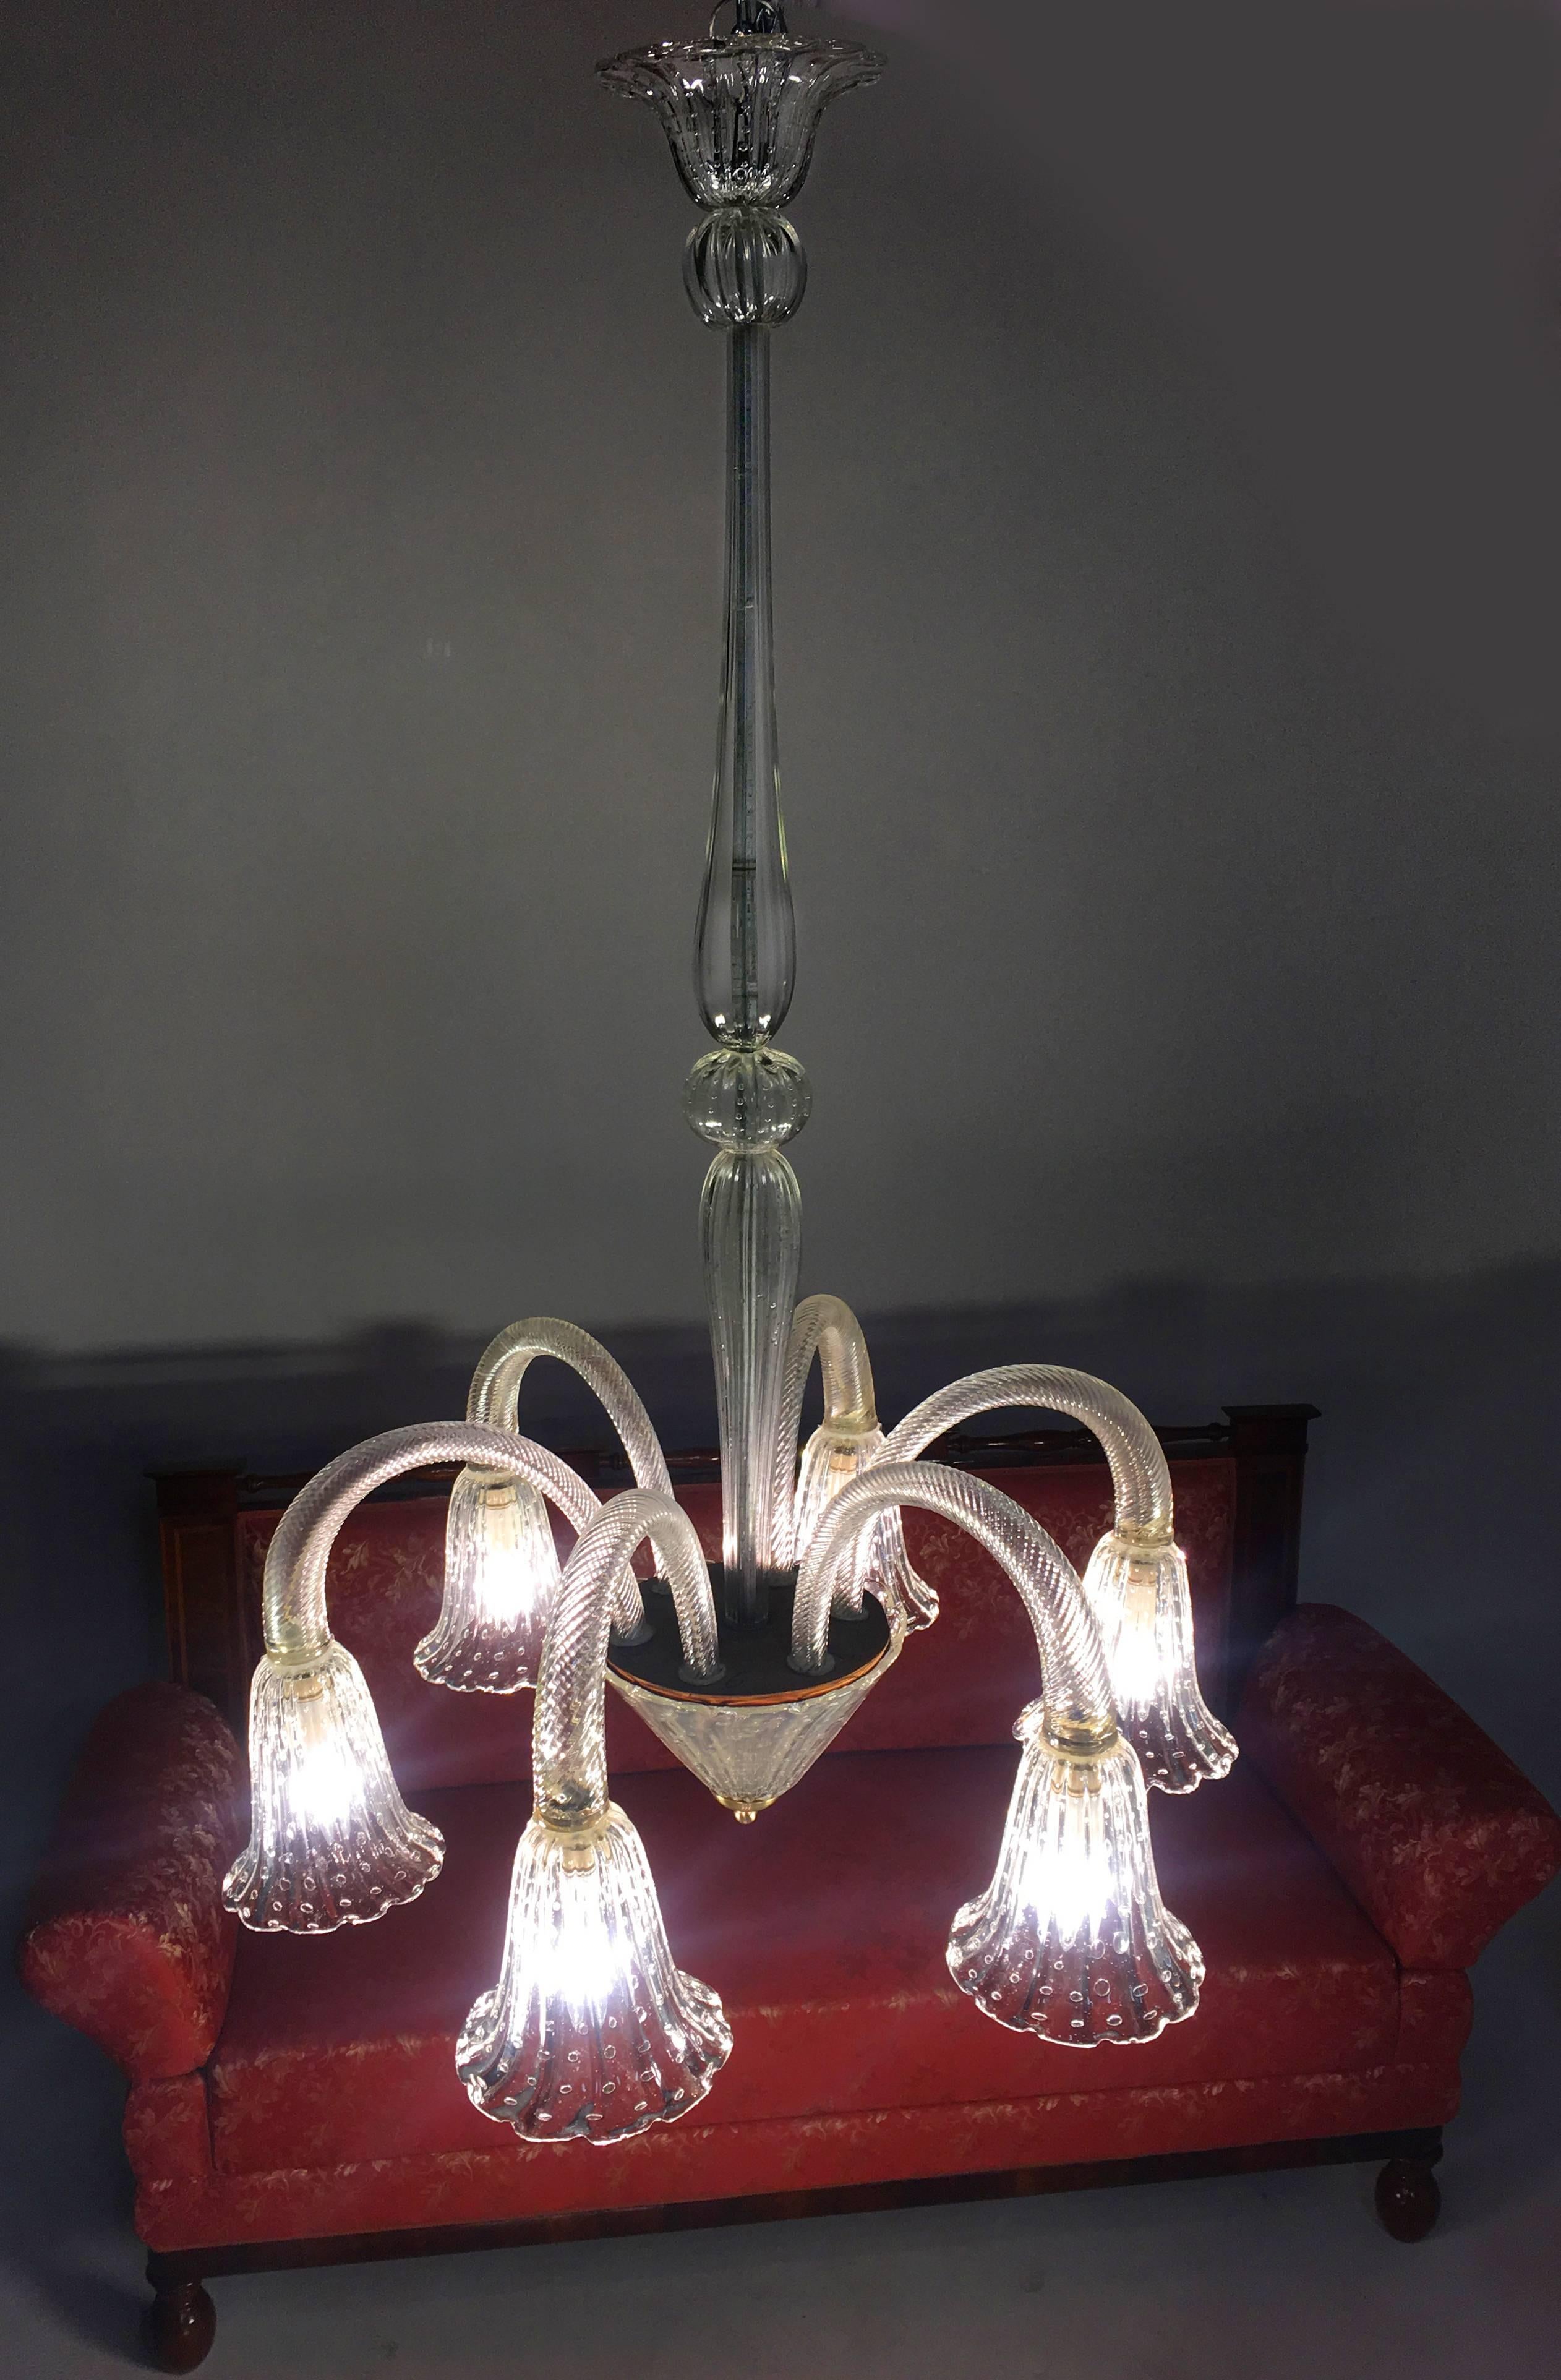 Amazing and elegant handblown Bulicante Murano chandelier by Ercole Barovier, circa 1940.
Measure: Diameter 70 cm
Height 115 cm
From Private collection.